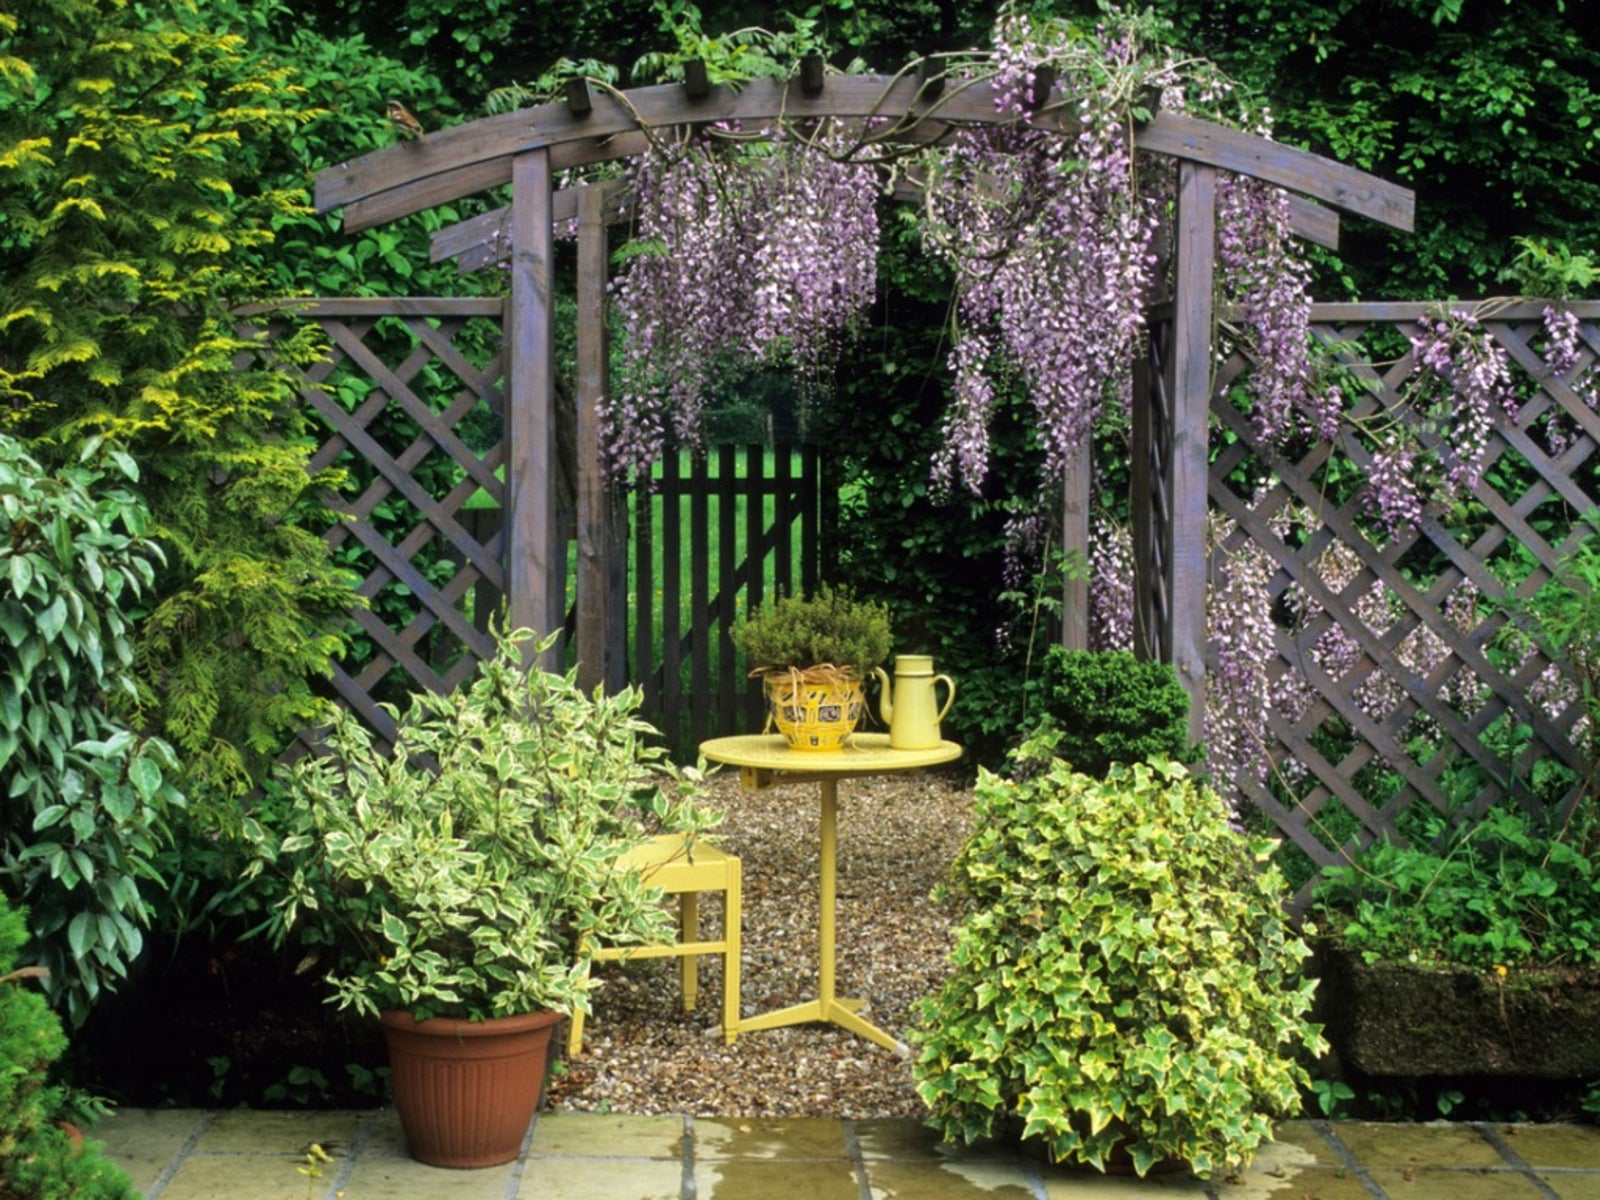 Pergola Plants: What Are The Best Plants For A Pergola?